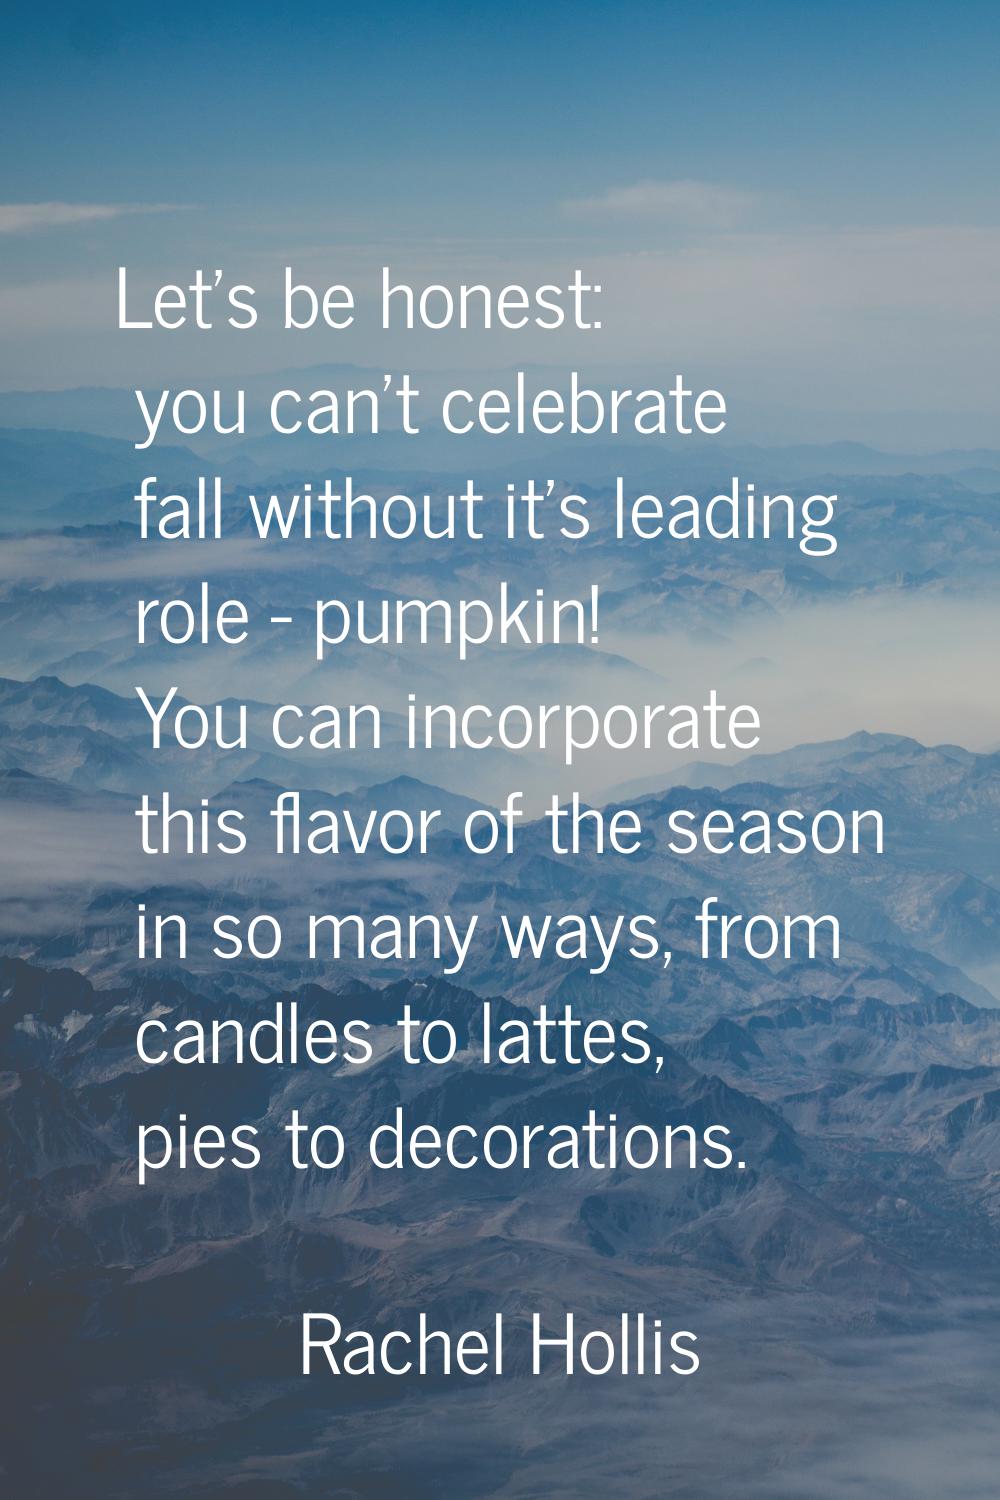 Let's be honest: you can't celebrate fall without it's leading role - pumpkin! You can incorporate 